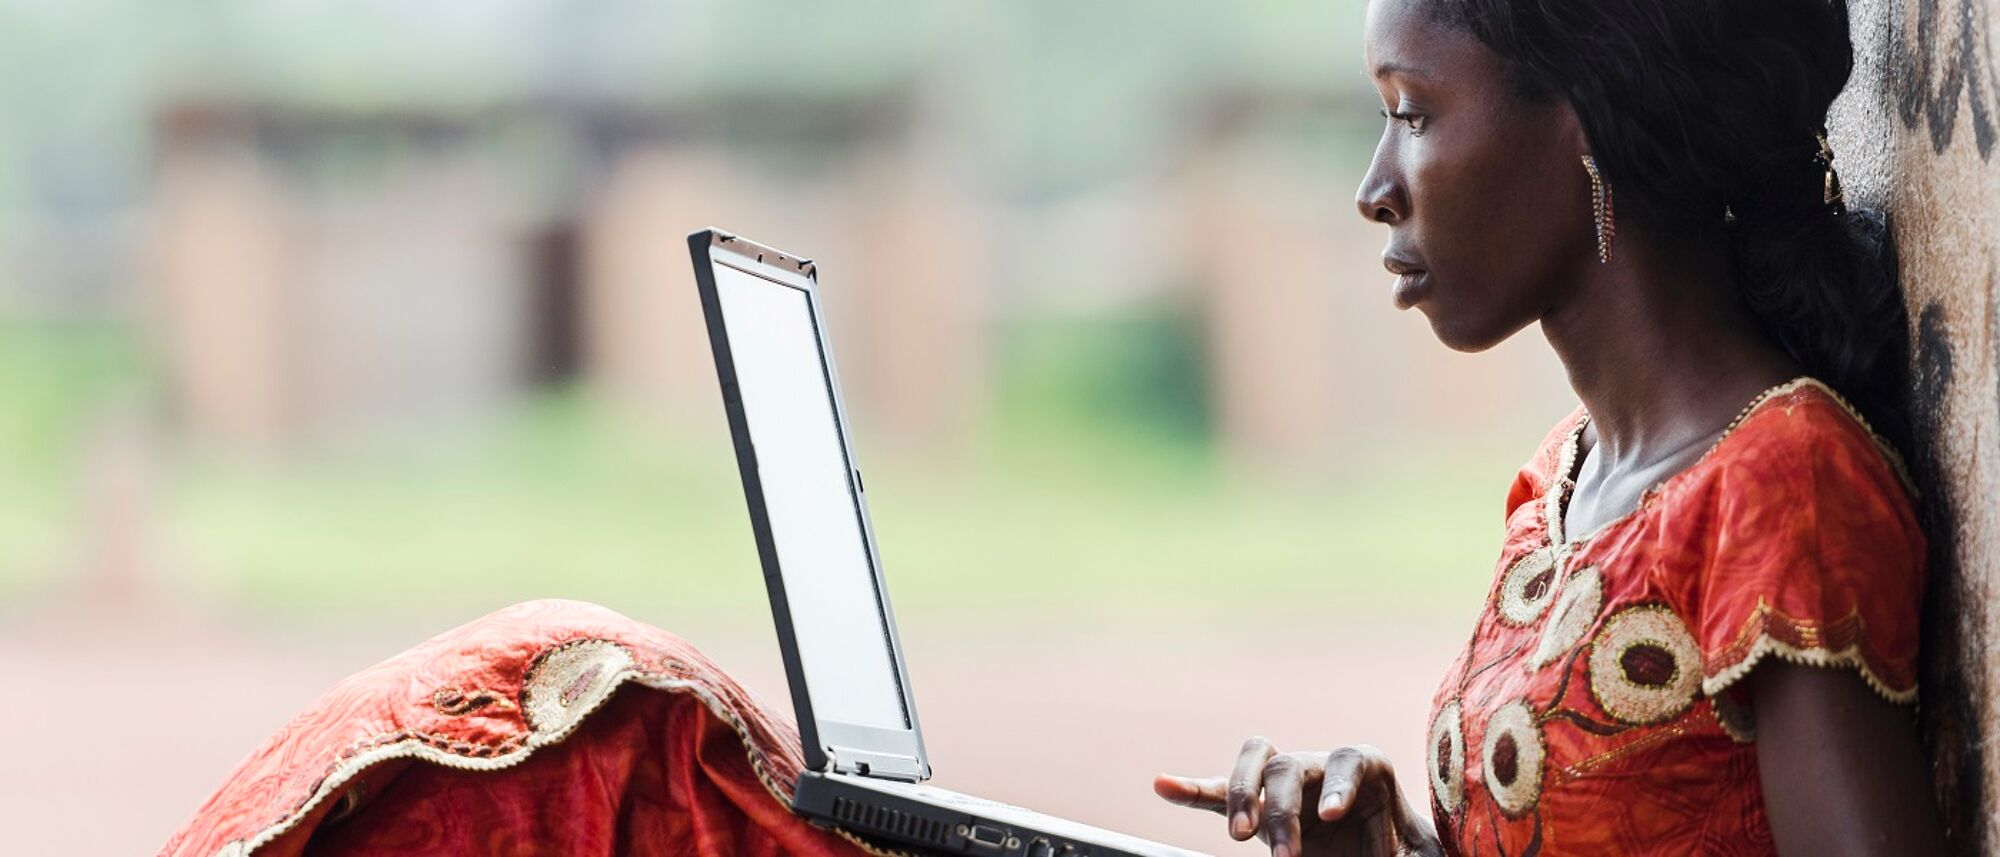 A young African woman sitting and leaning against a wall to use her laptop.Image credit: borgogniels | iStockphoto https://www.istockphoto.com/photo/technology-symbol-african-woman-studying-learning-lesson-gm529835071-54284780